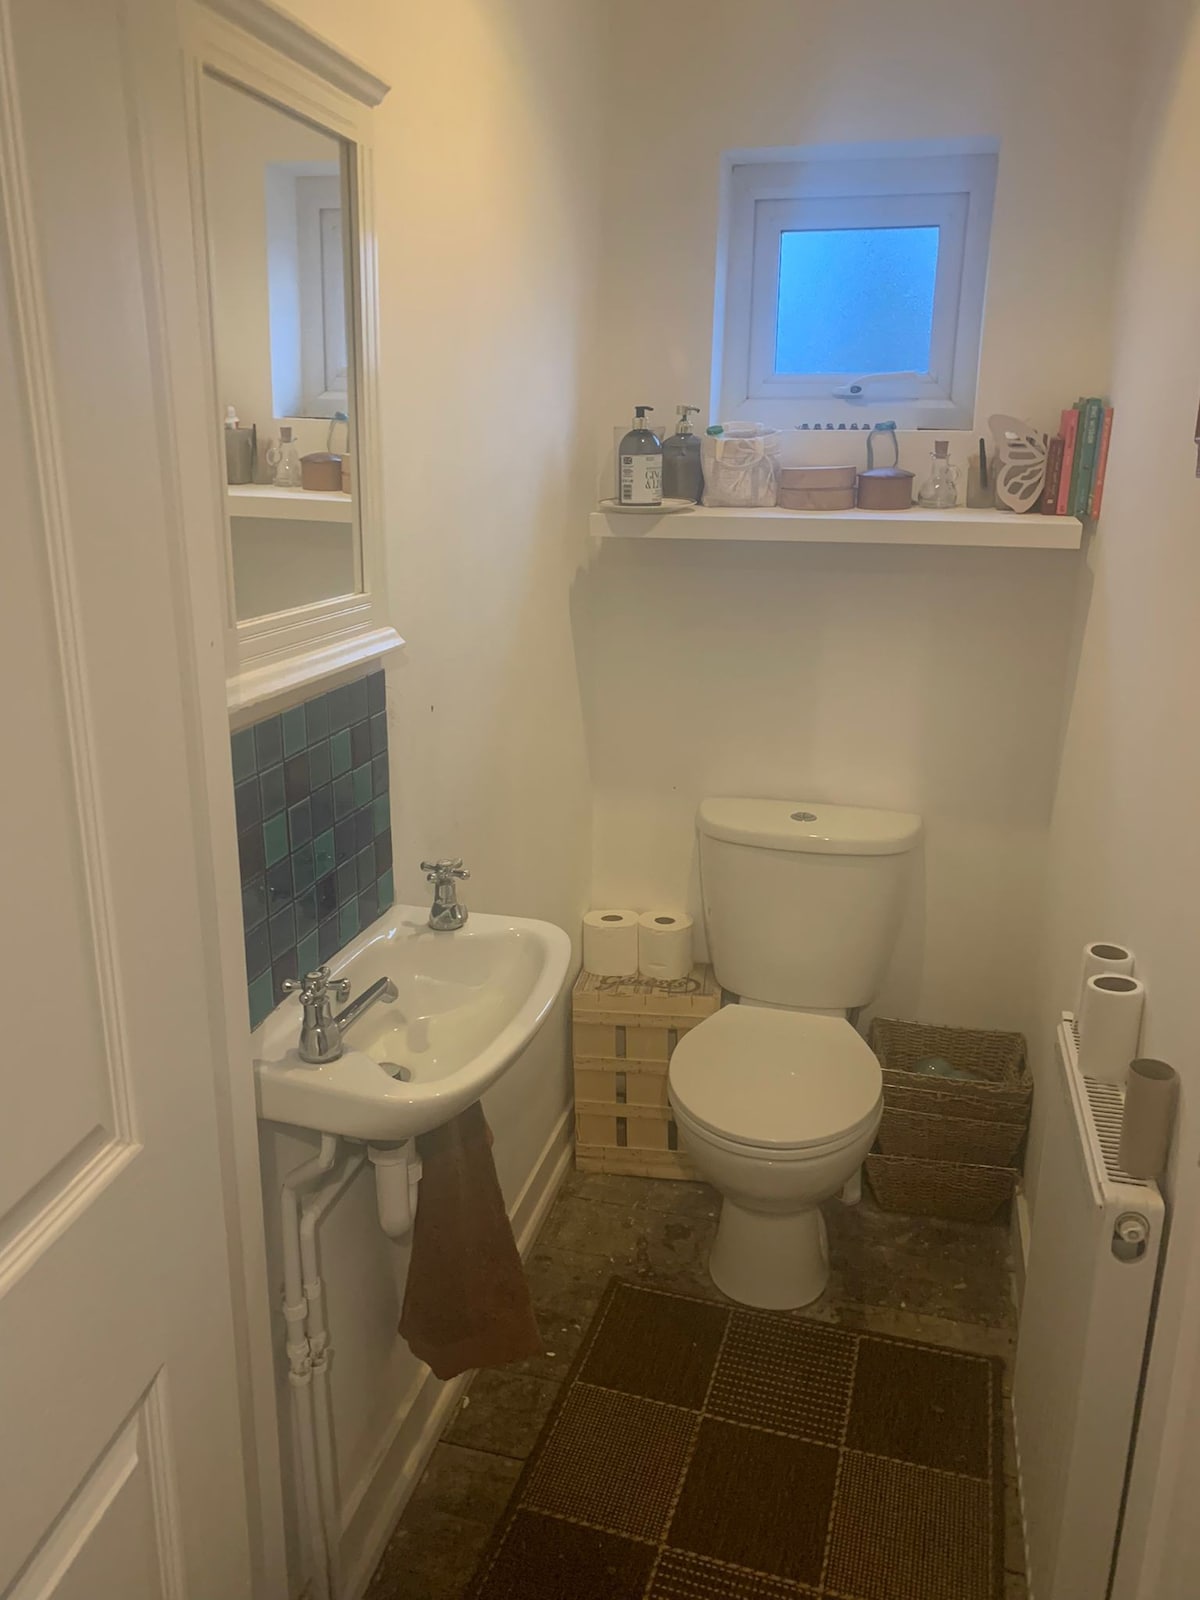 Bedroom with ensuite 20 mins walk to Ascot station